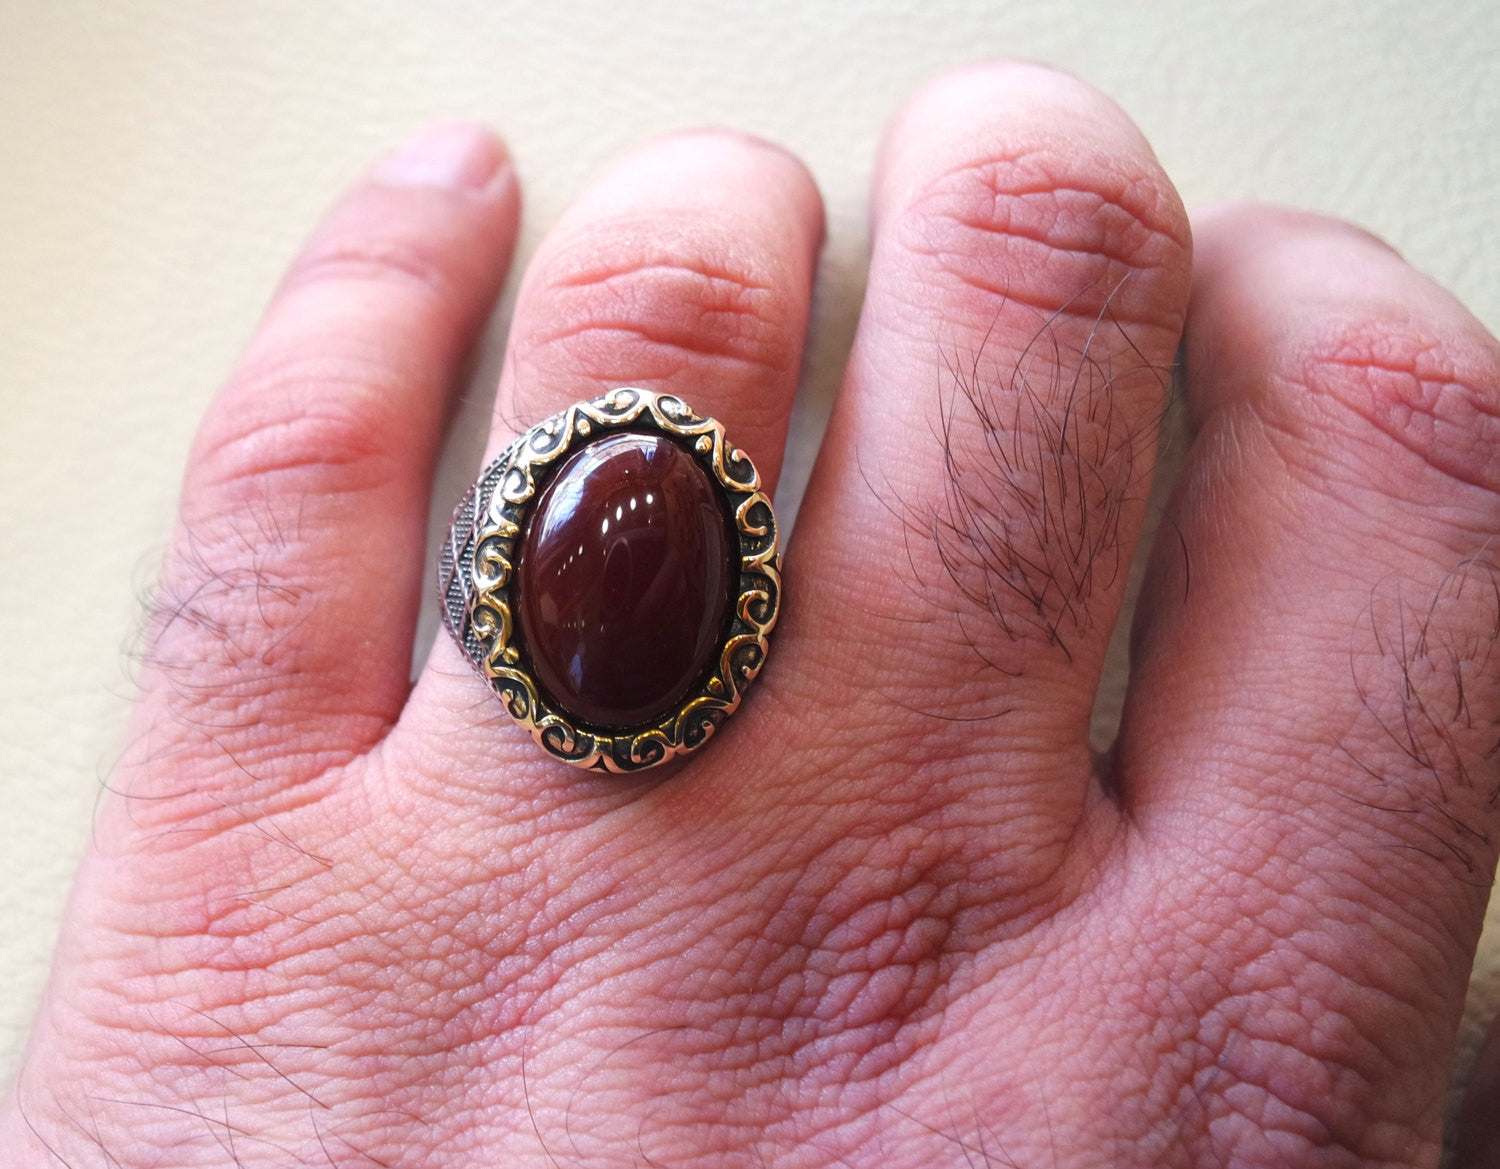 liver agate aqeeq ring sterling silver 925 ring any size antique middle eastern style dark carnelian semi precious natural cabochon عقيق